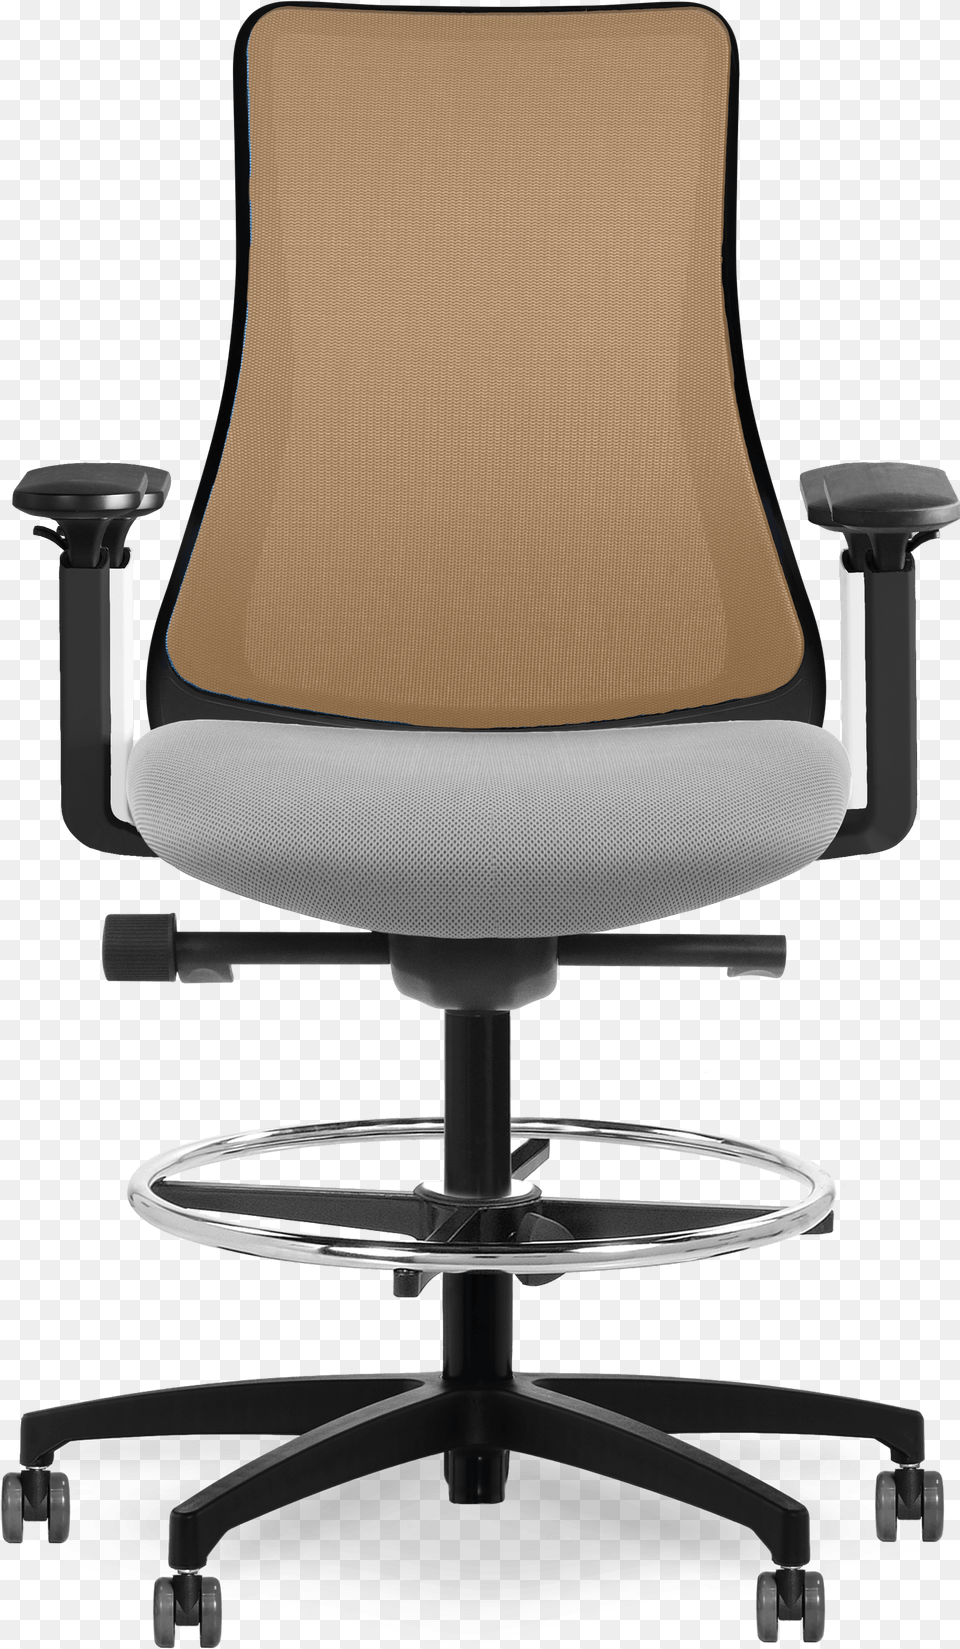 Genie Copper Mesh Product Gallery Office Chair, Cushion, Furniture, Home Decor Free Transparent Png